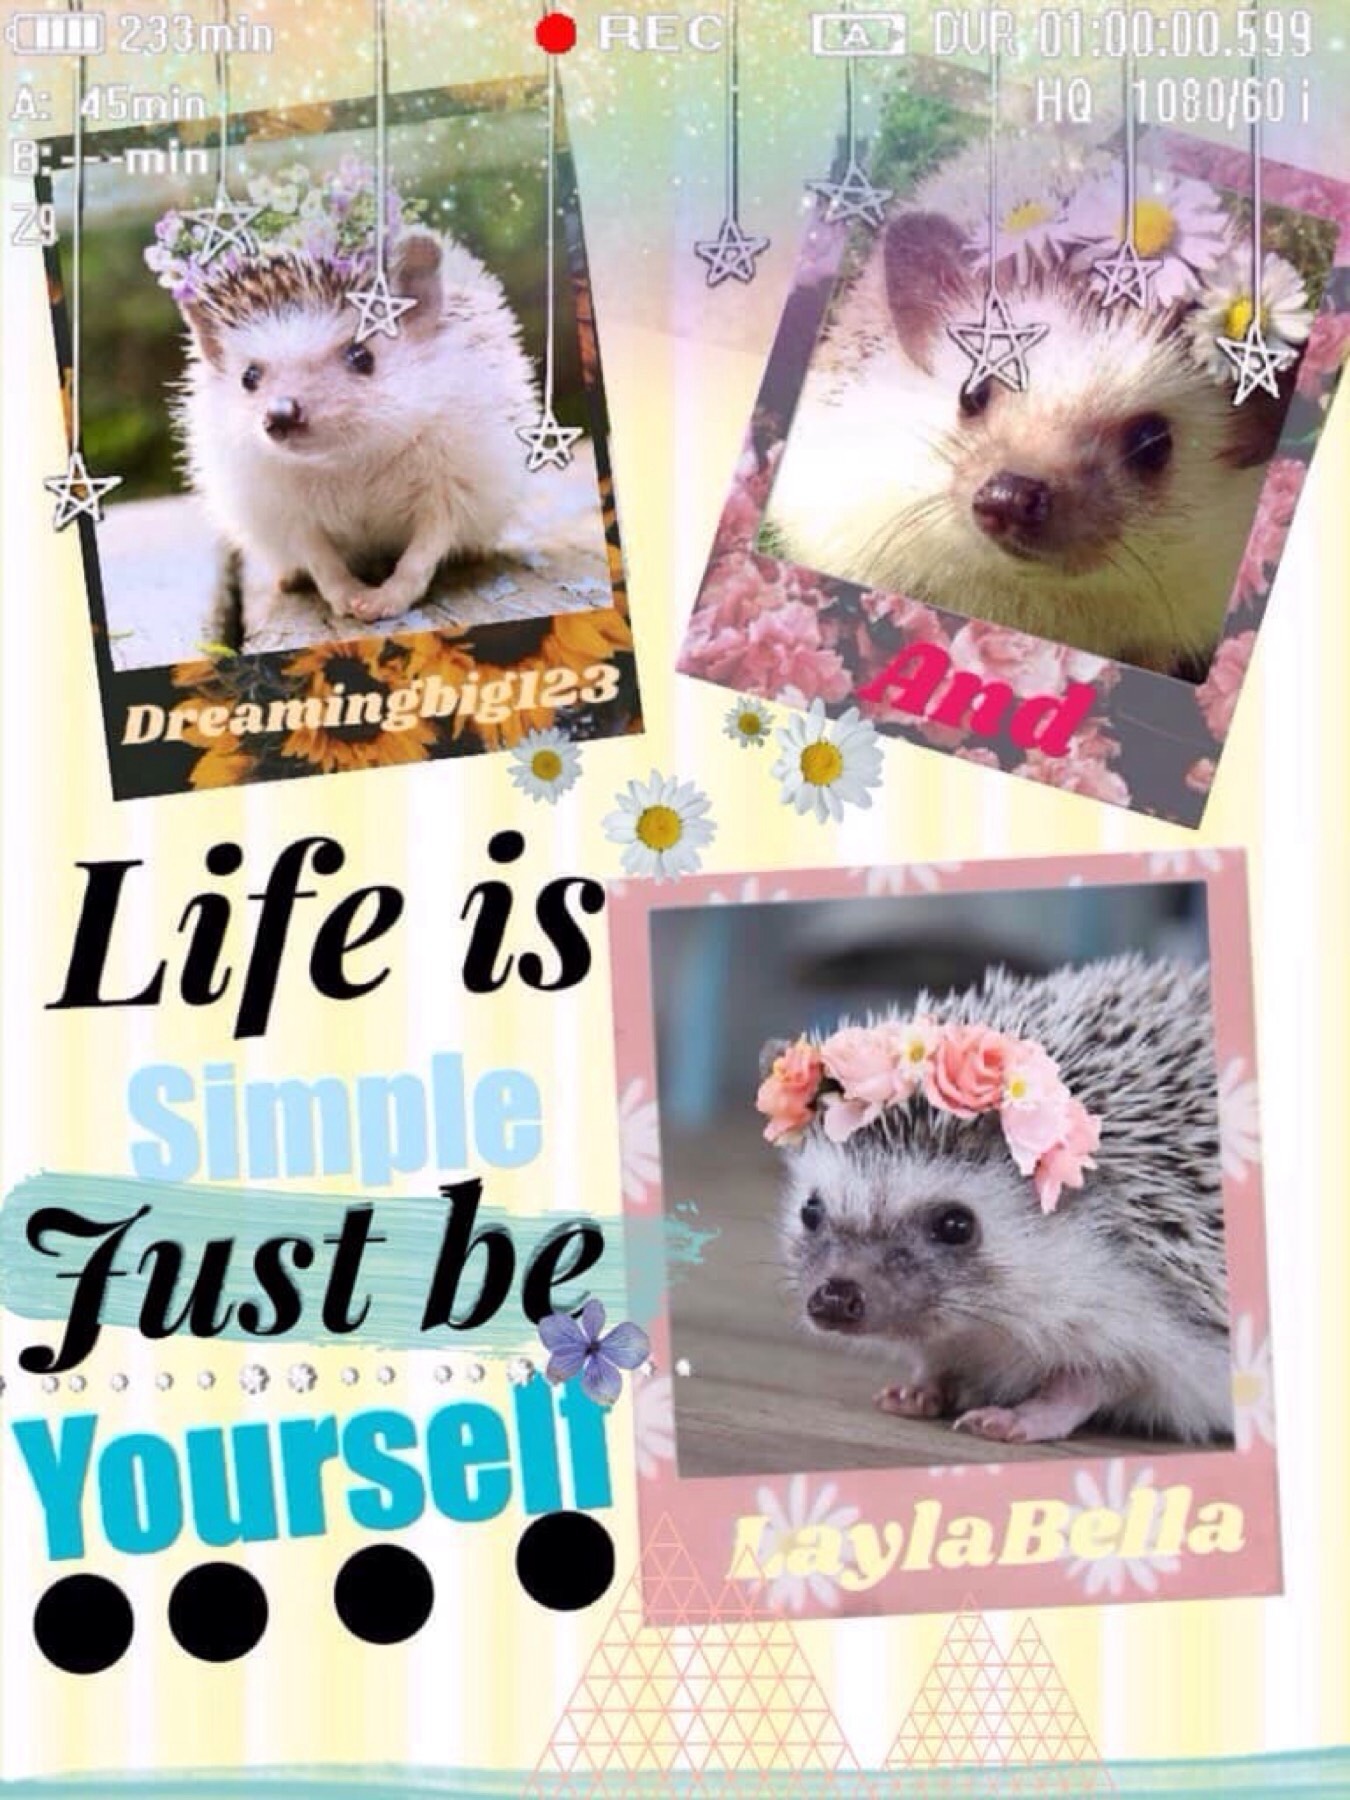 Tap collab with
Dreamingbig123 and I 
Life is simple just be yourself 